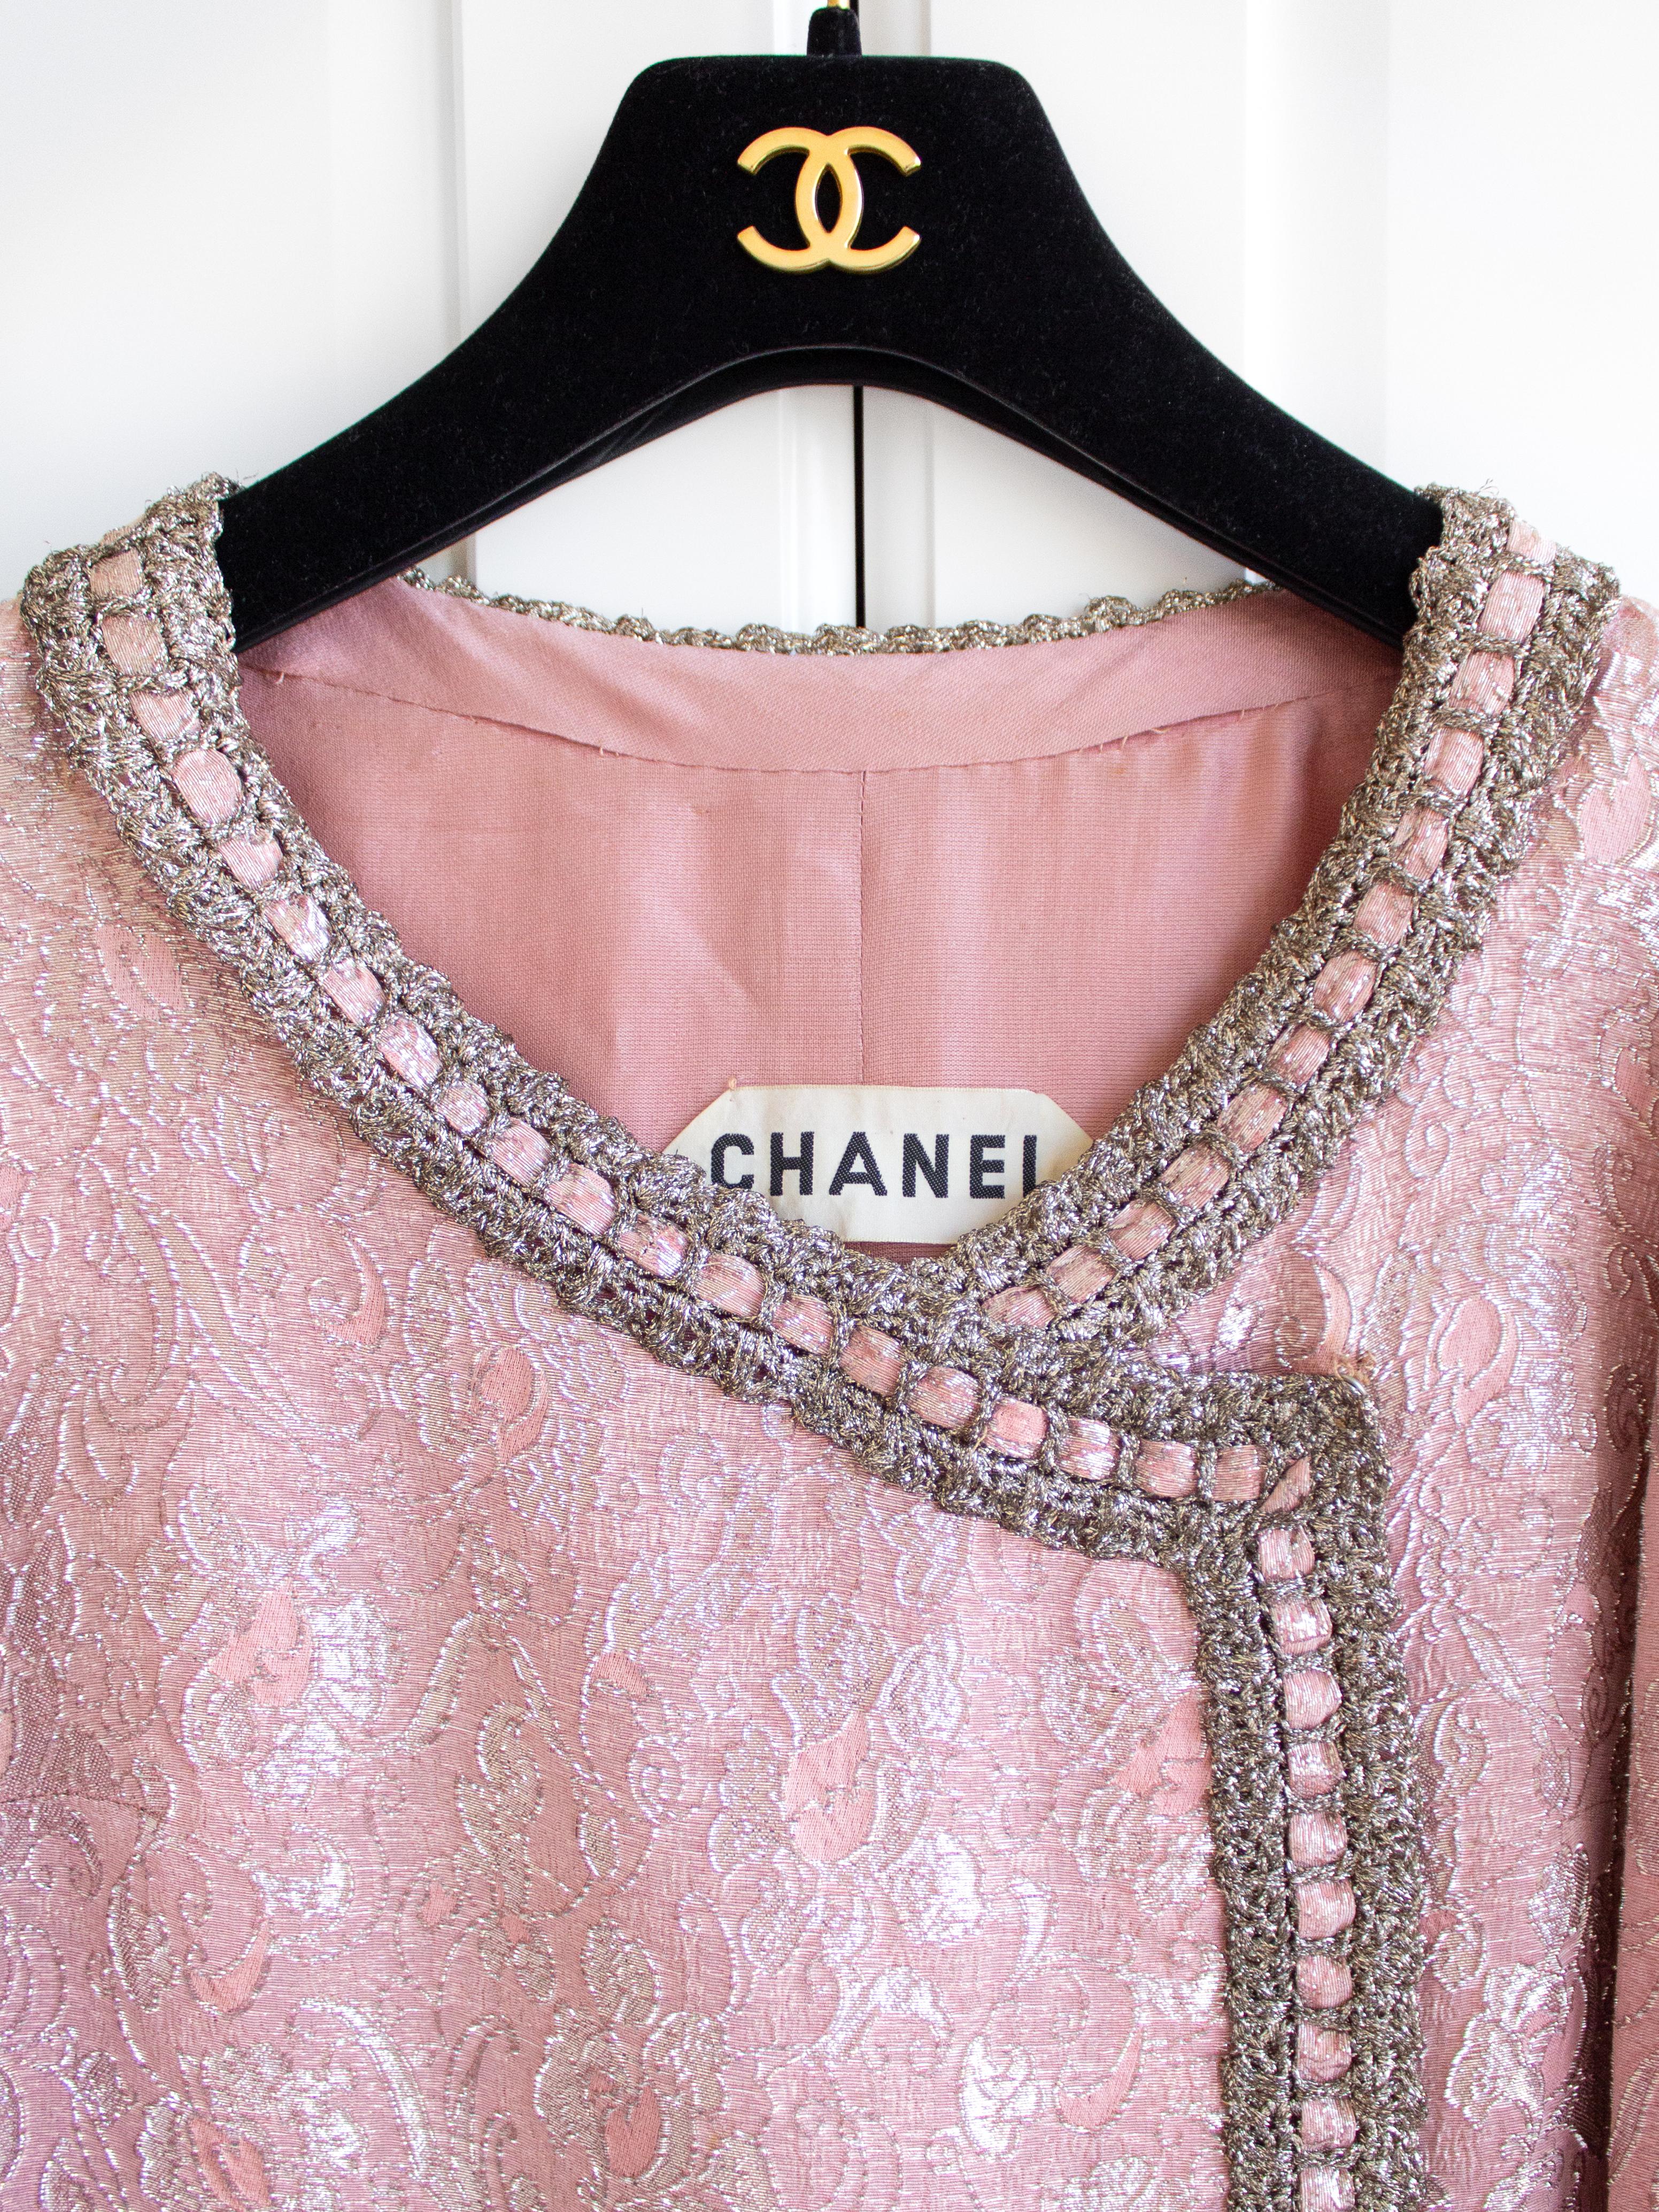 Chanel Vintage Haute Couture 1960s Pink Silver Braided Brocade Jacket Skirt Suit 2